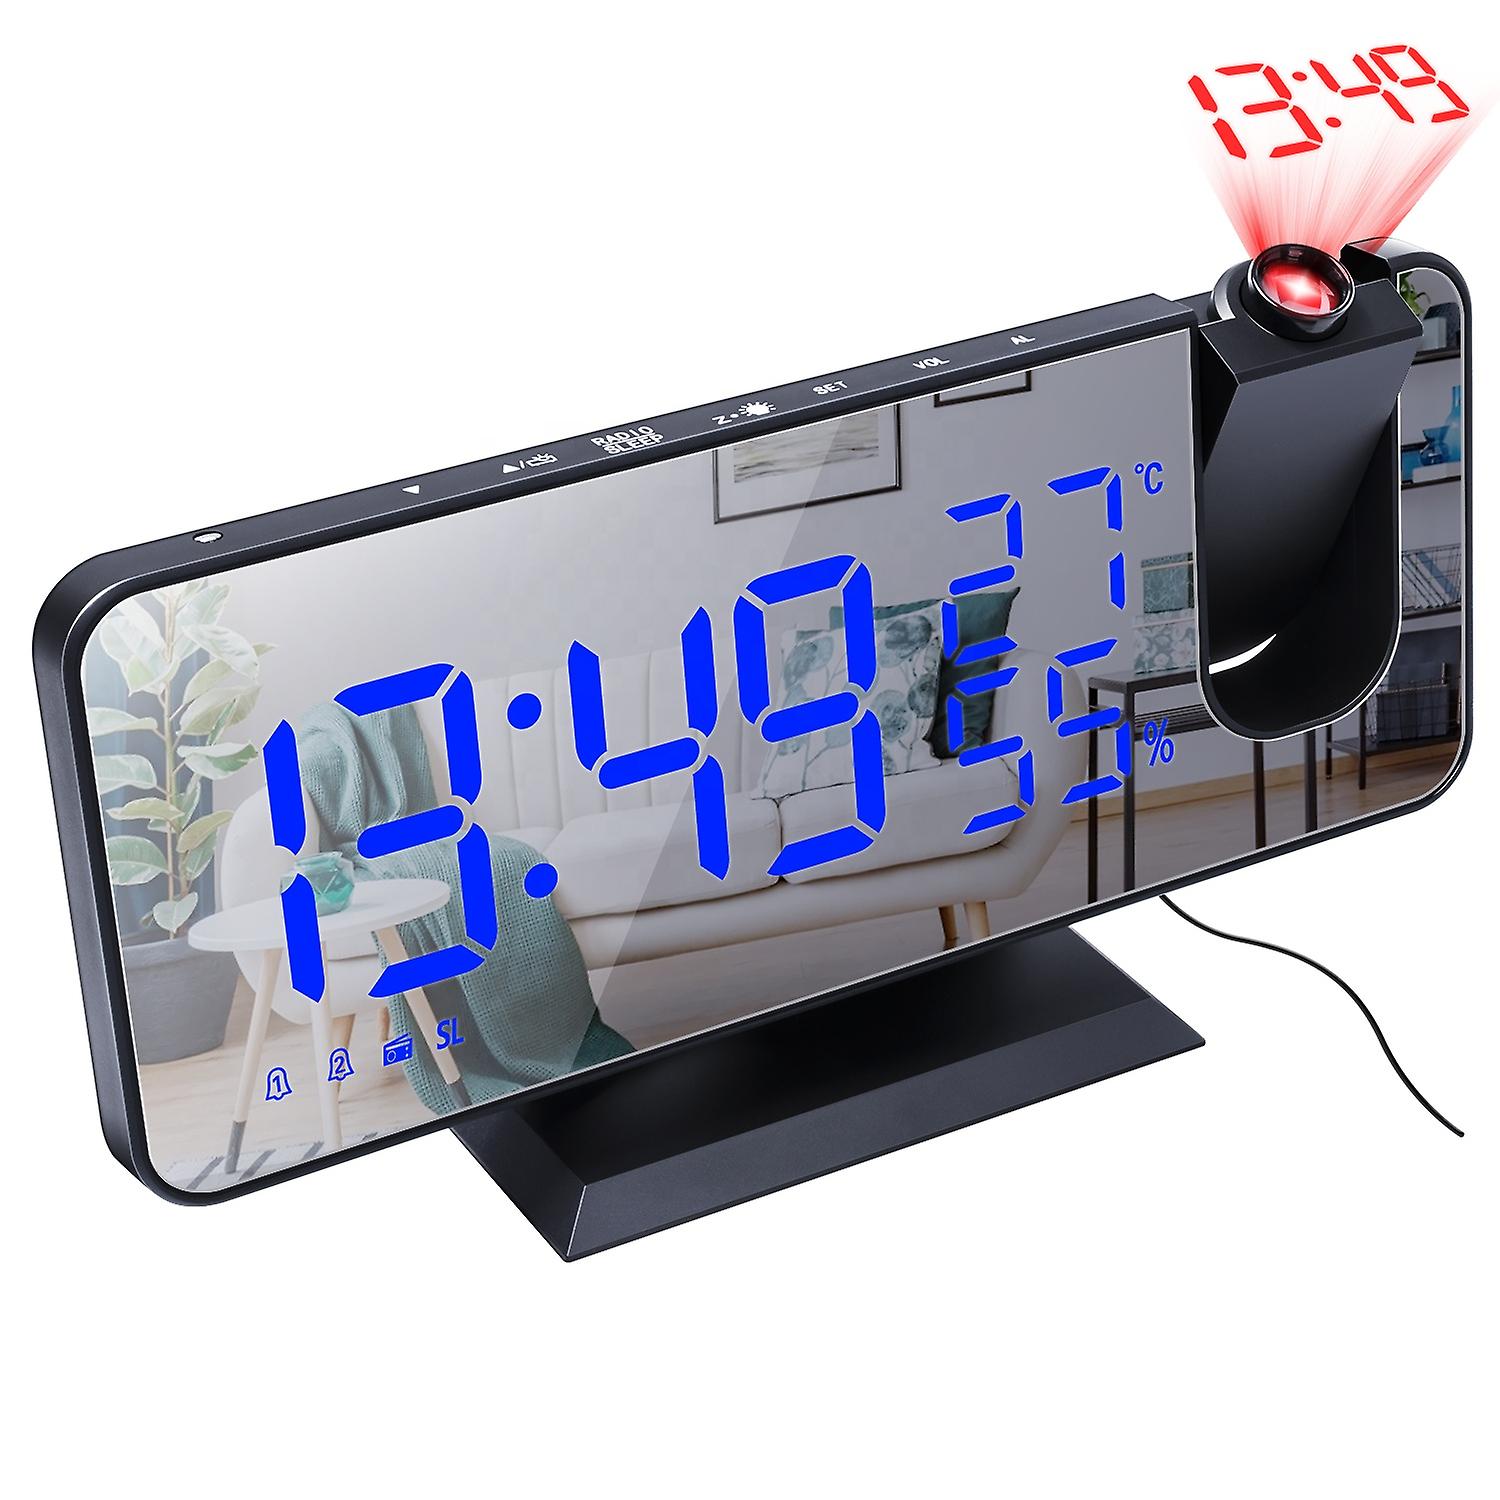 15 Best Alarm Clock Ceiling Projection for 2023